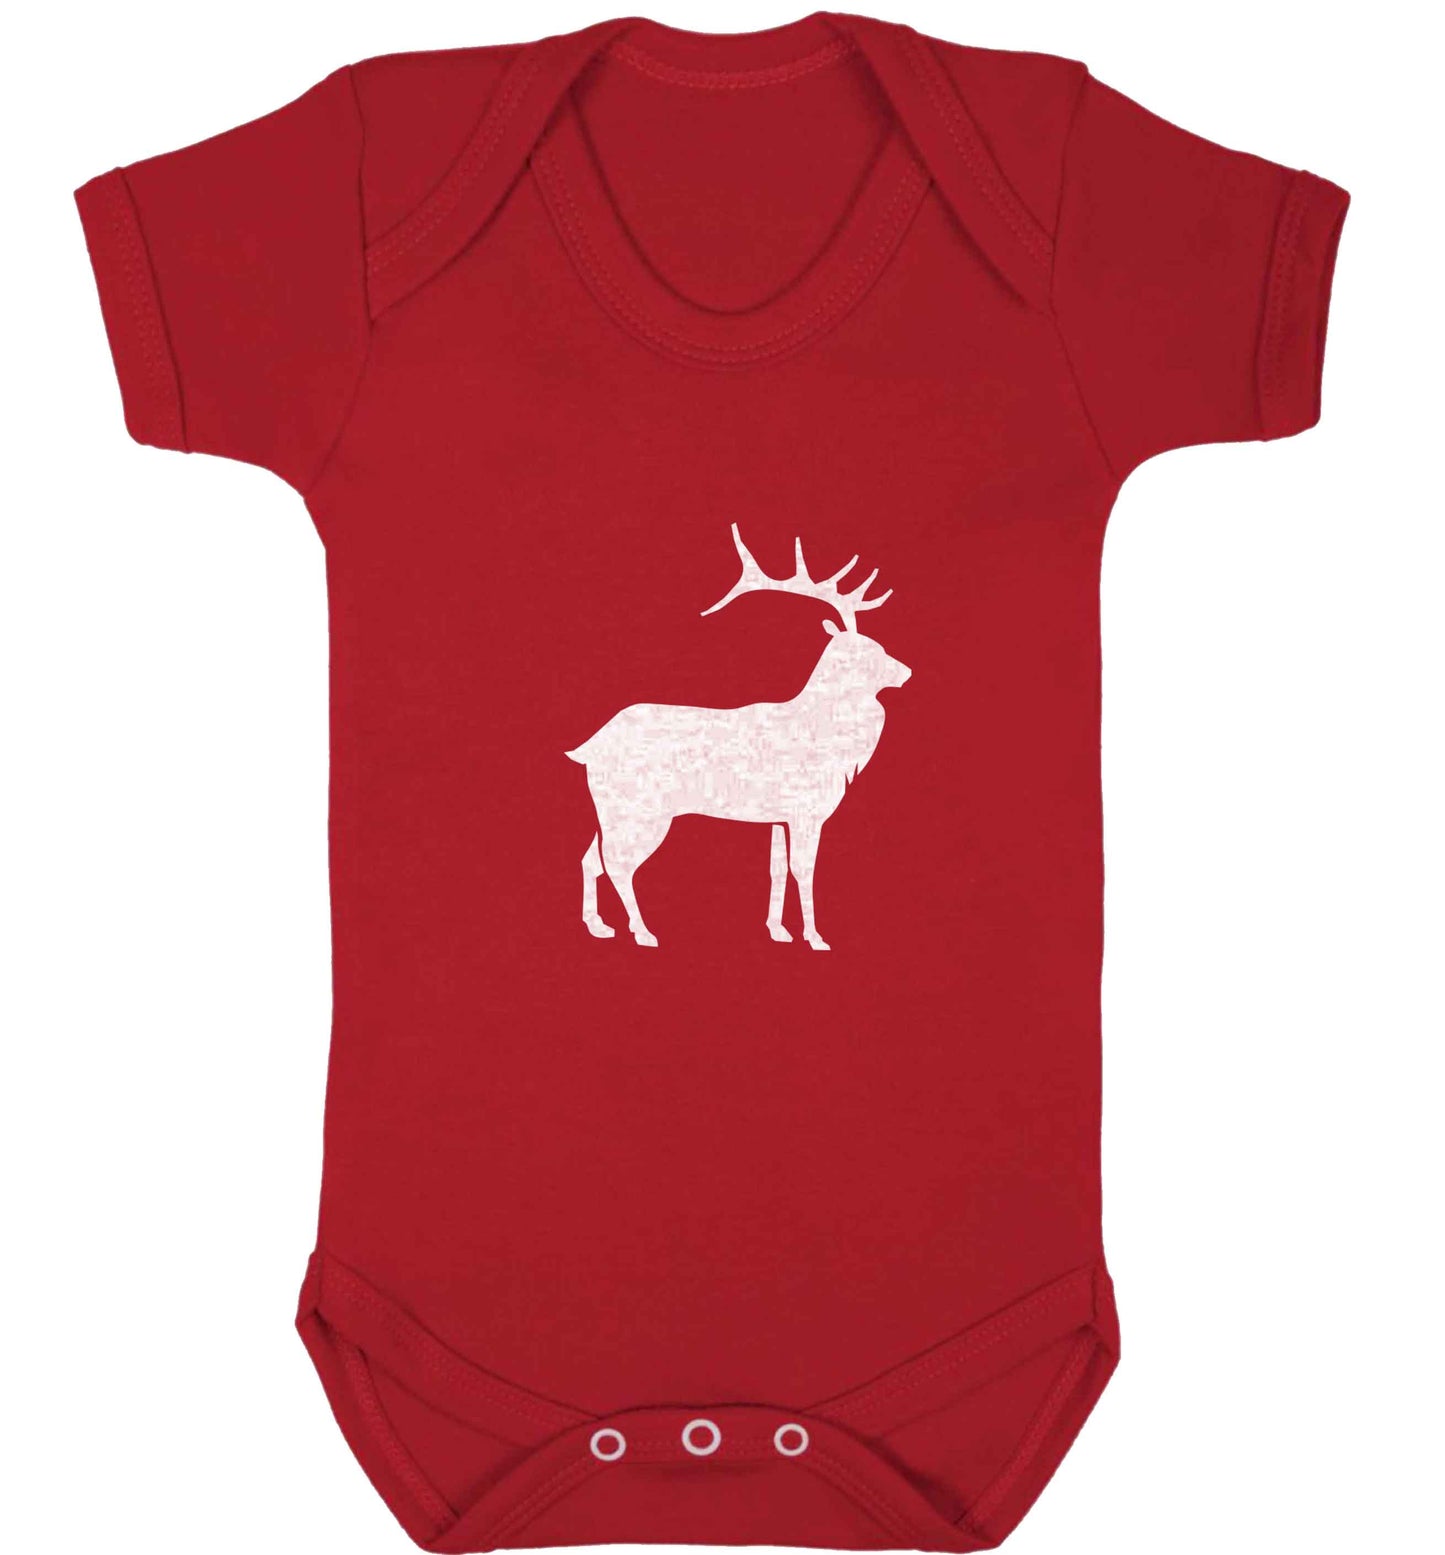 Green stag baby vest red 18-24 months